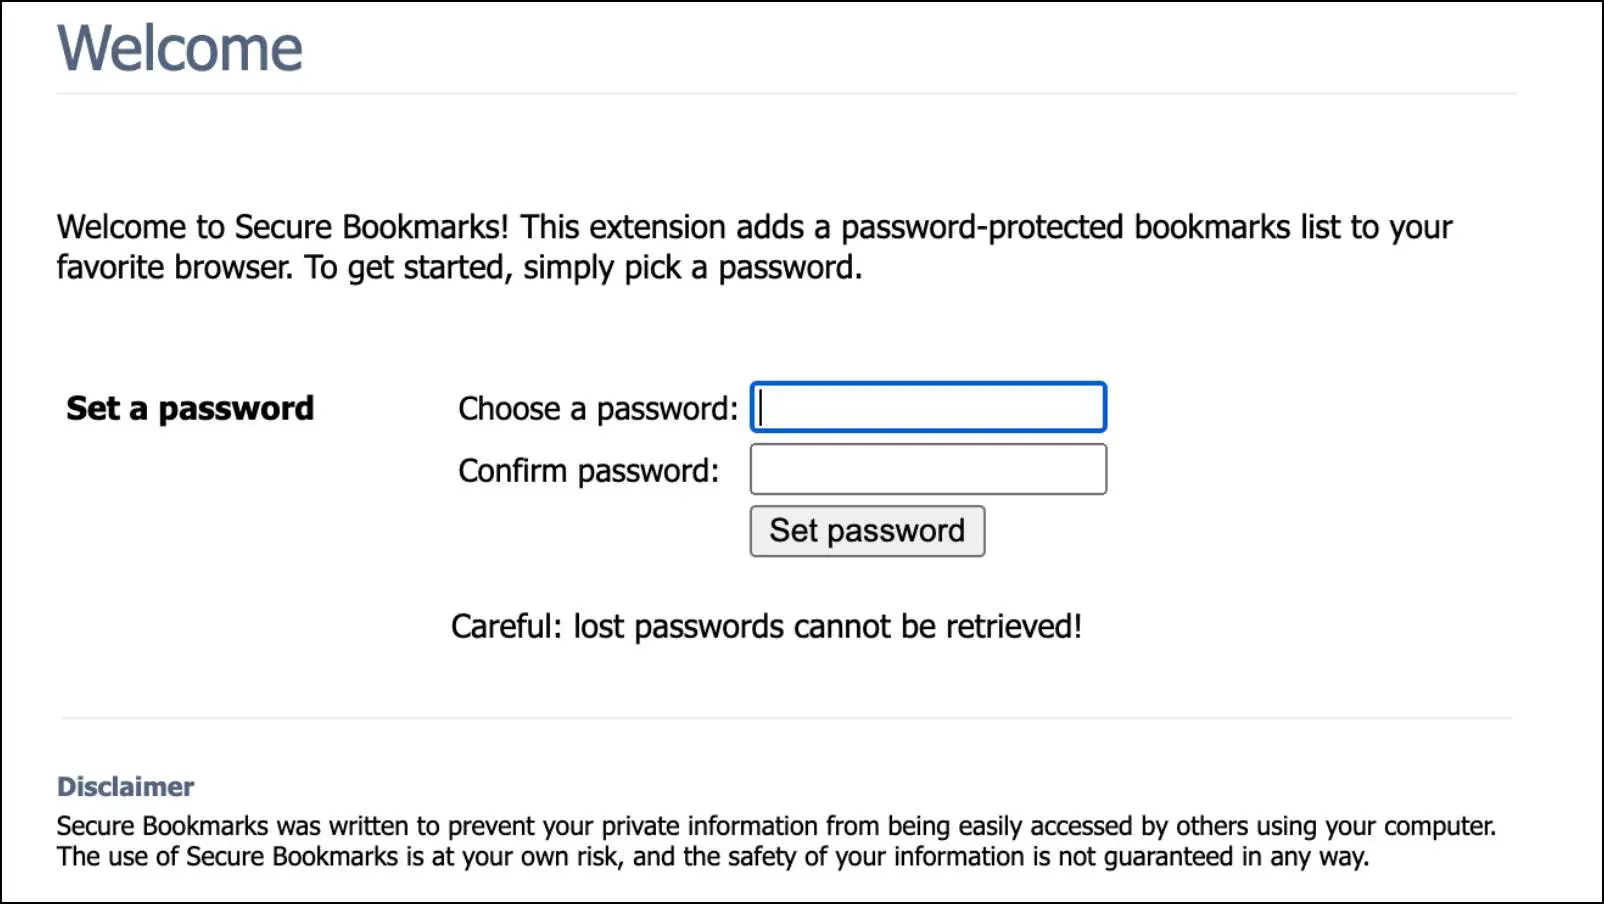 Create a New Password to protect your Bookmarks